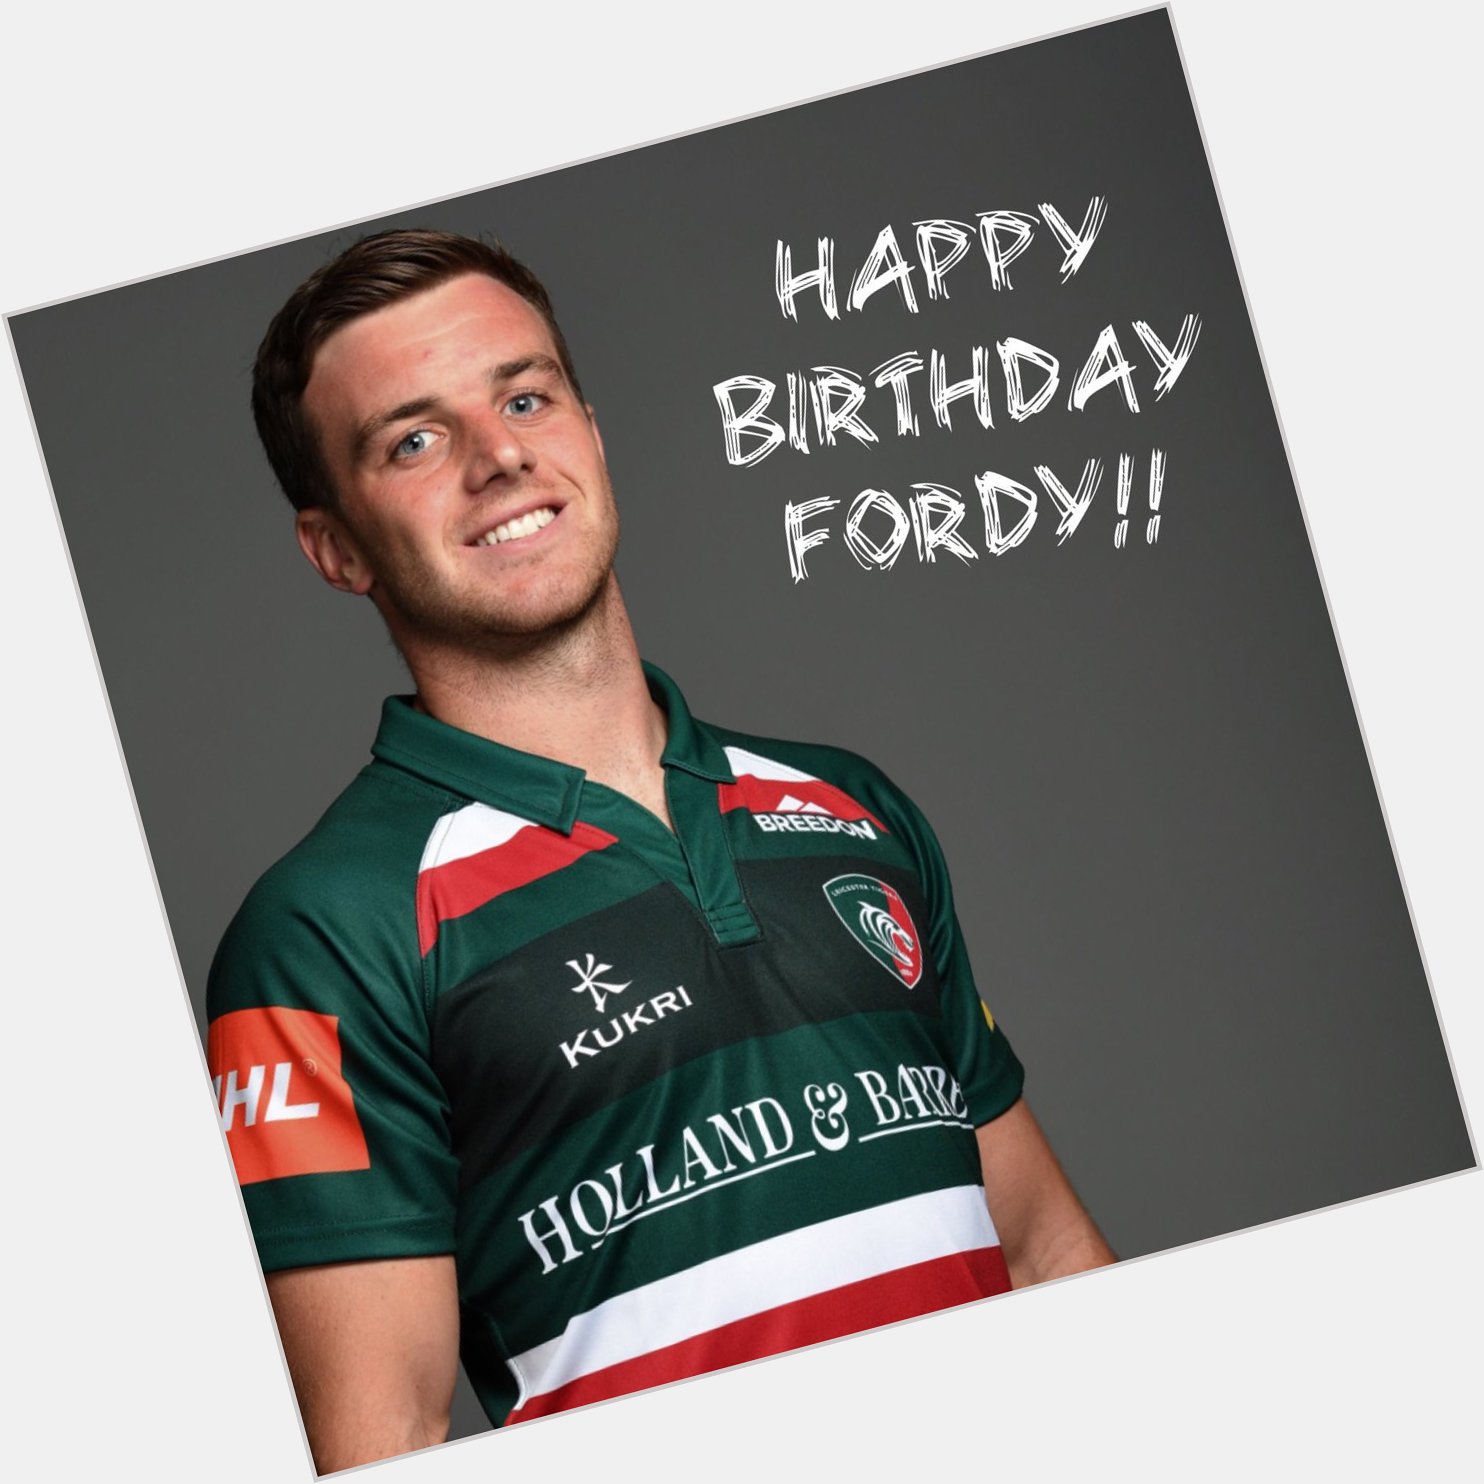  Join us in wishing a Happy Birthday to fly-half George Ford for today!! 